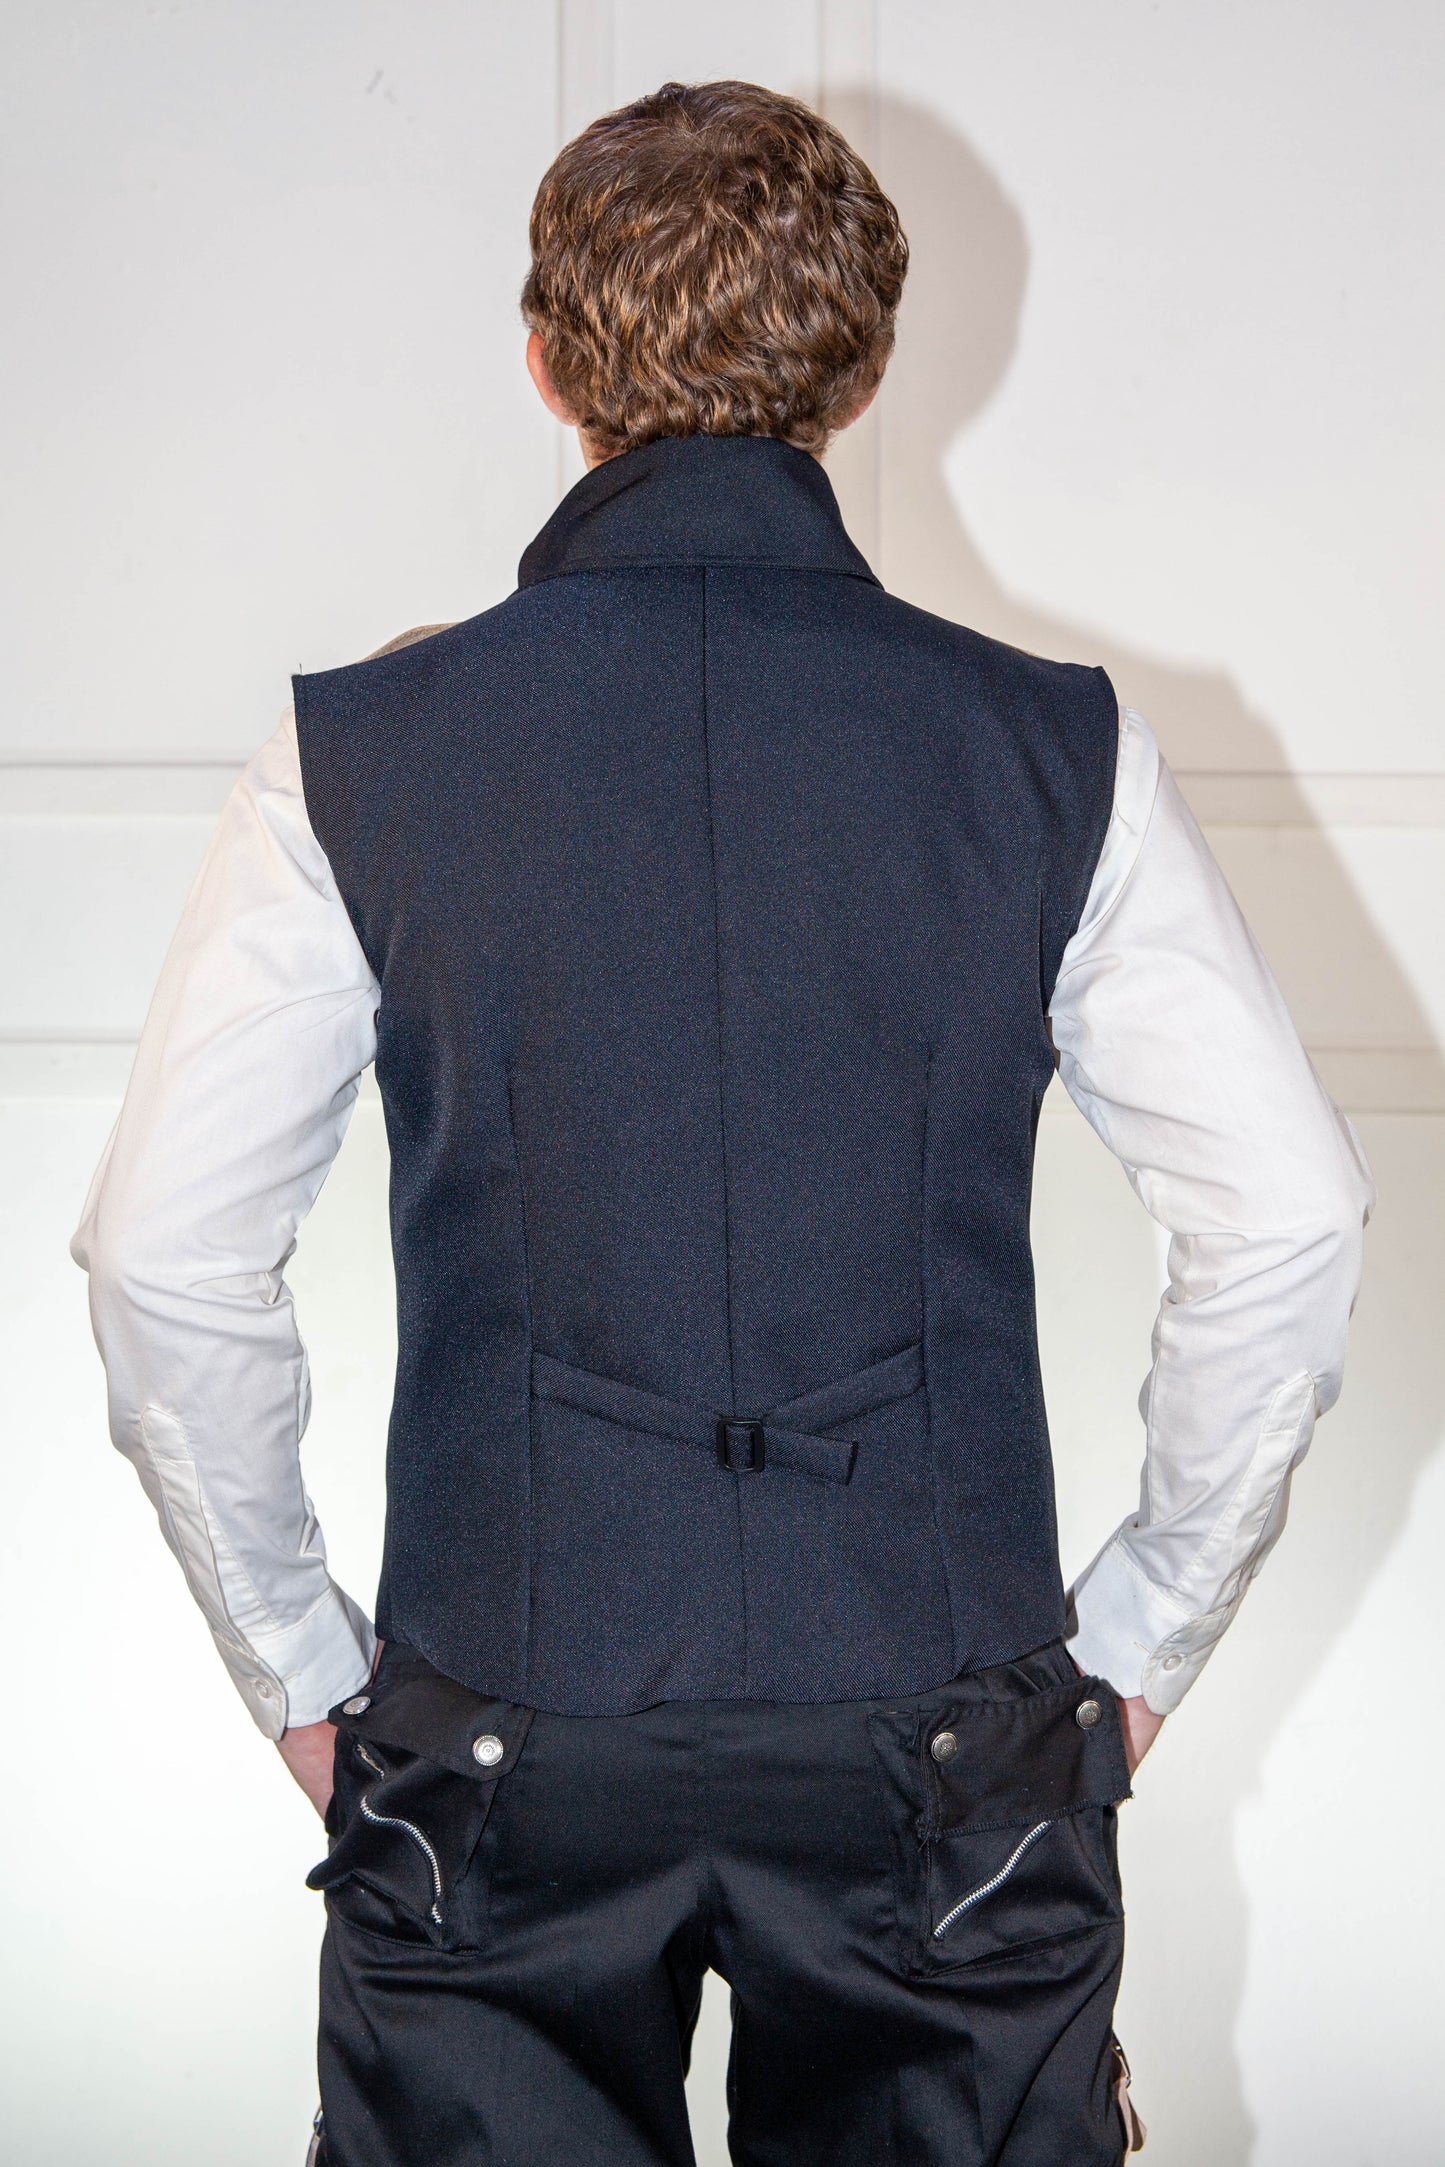 Waistcoat - Black with Brown Leather Straps